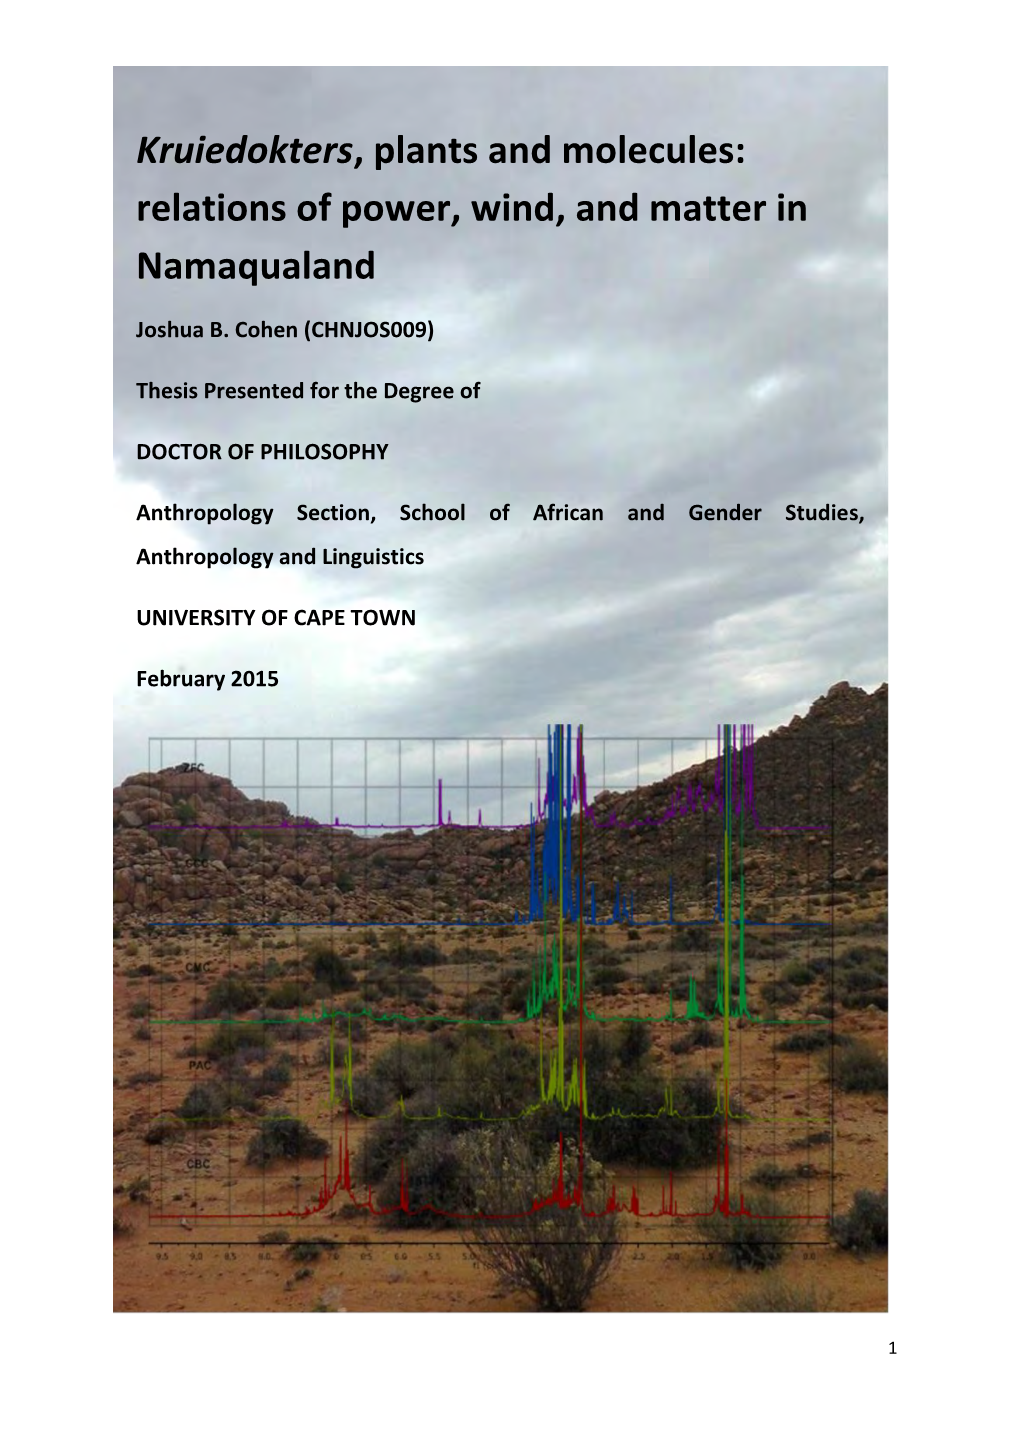 Kruiedokters, Plants and Molecules: Relations of Power, Wind, and Matter in Namaqualand